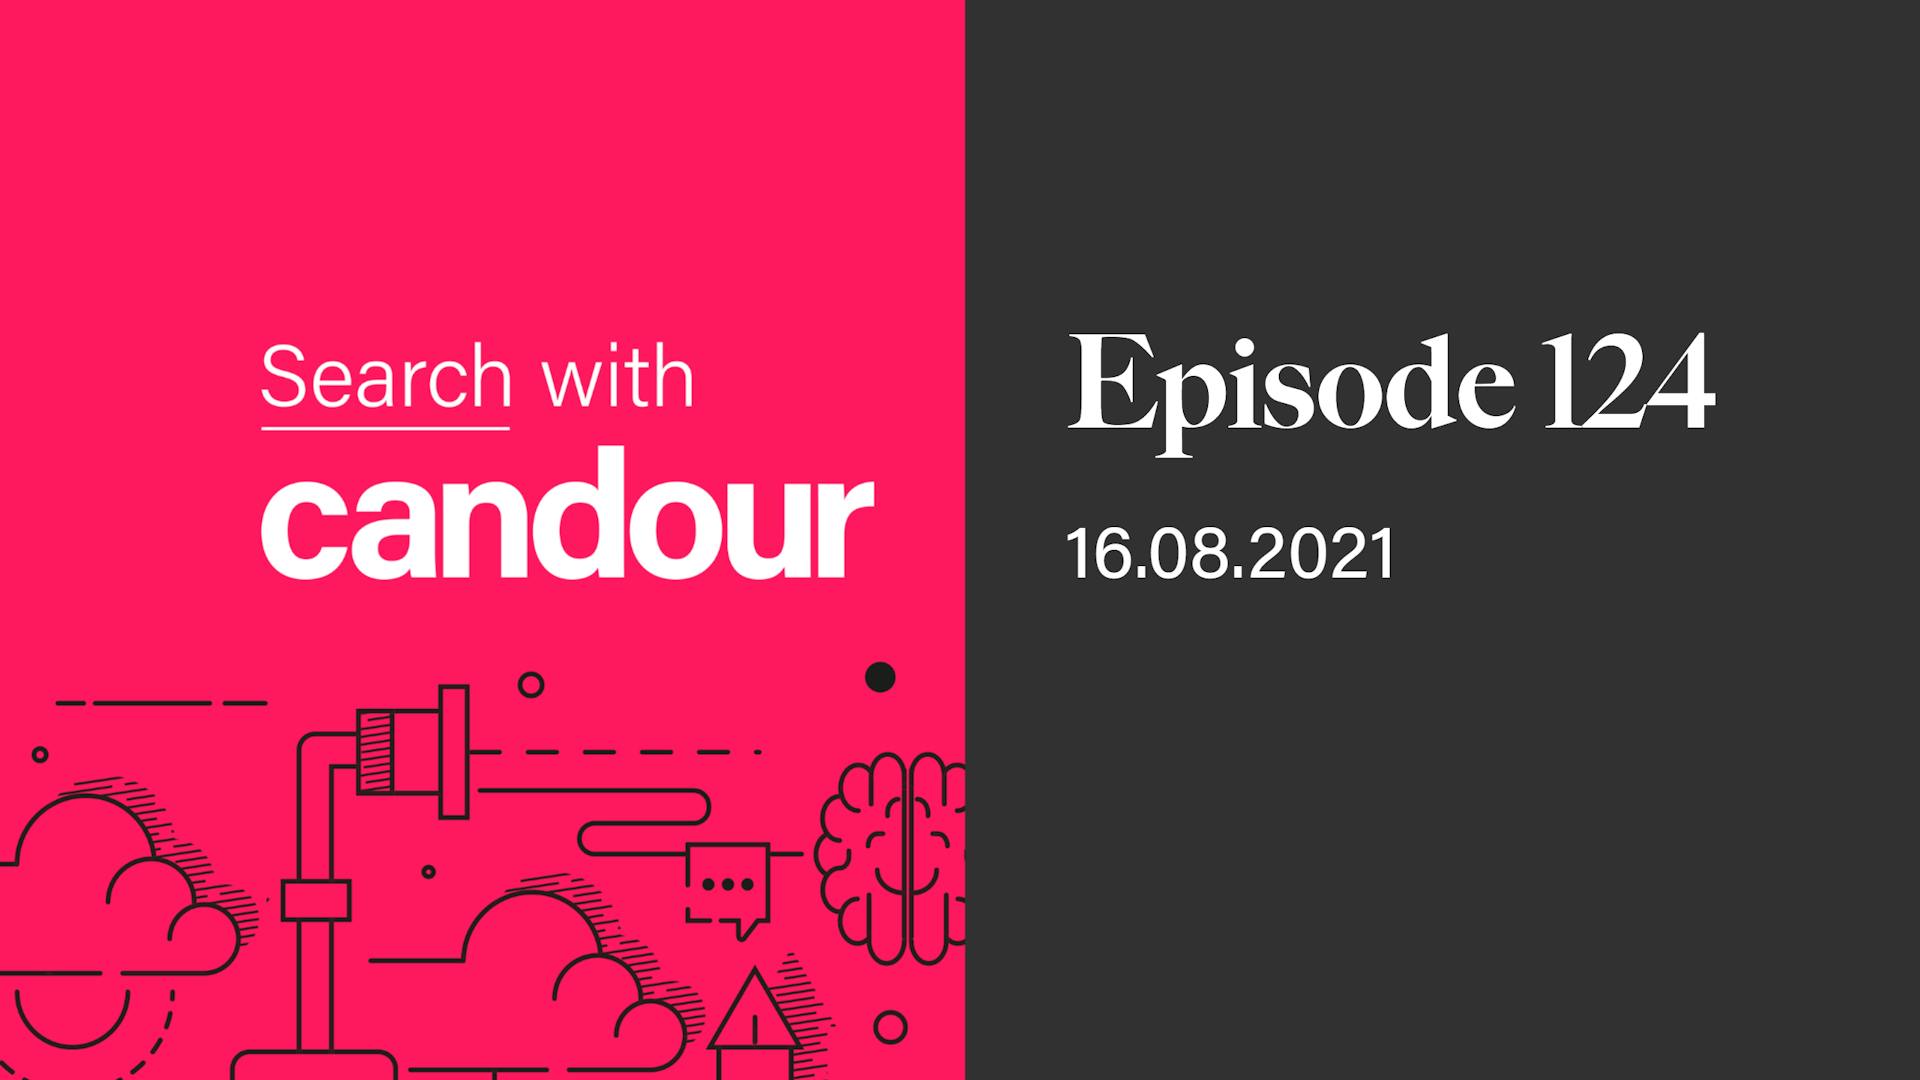 Episode 24 - Search with Candour